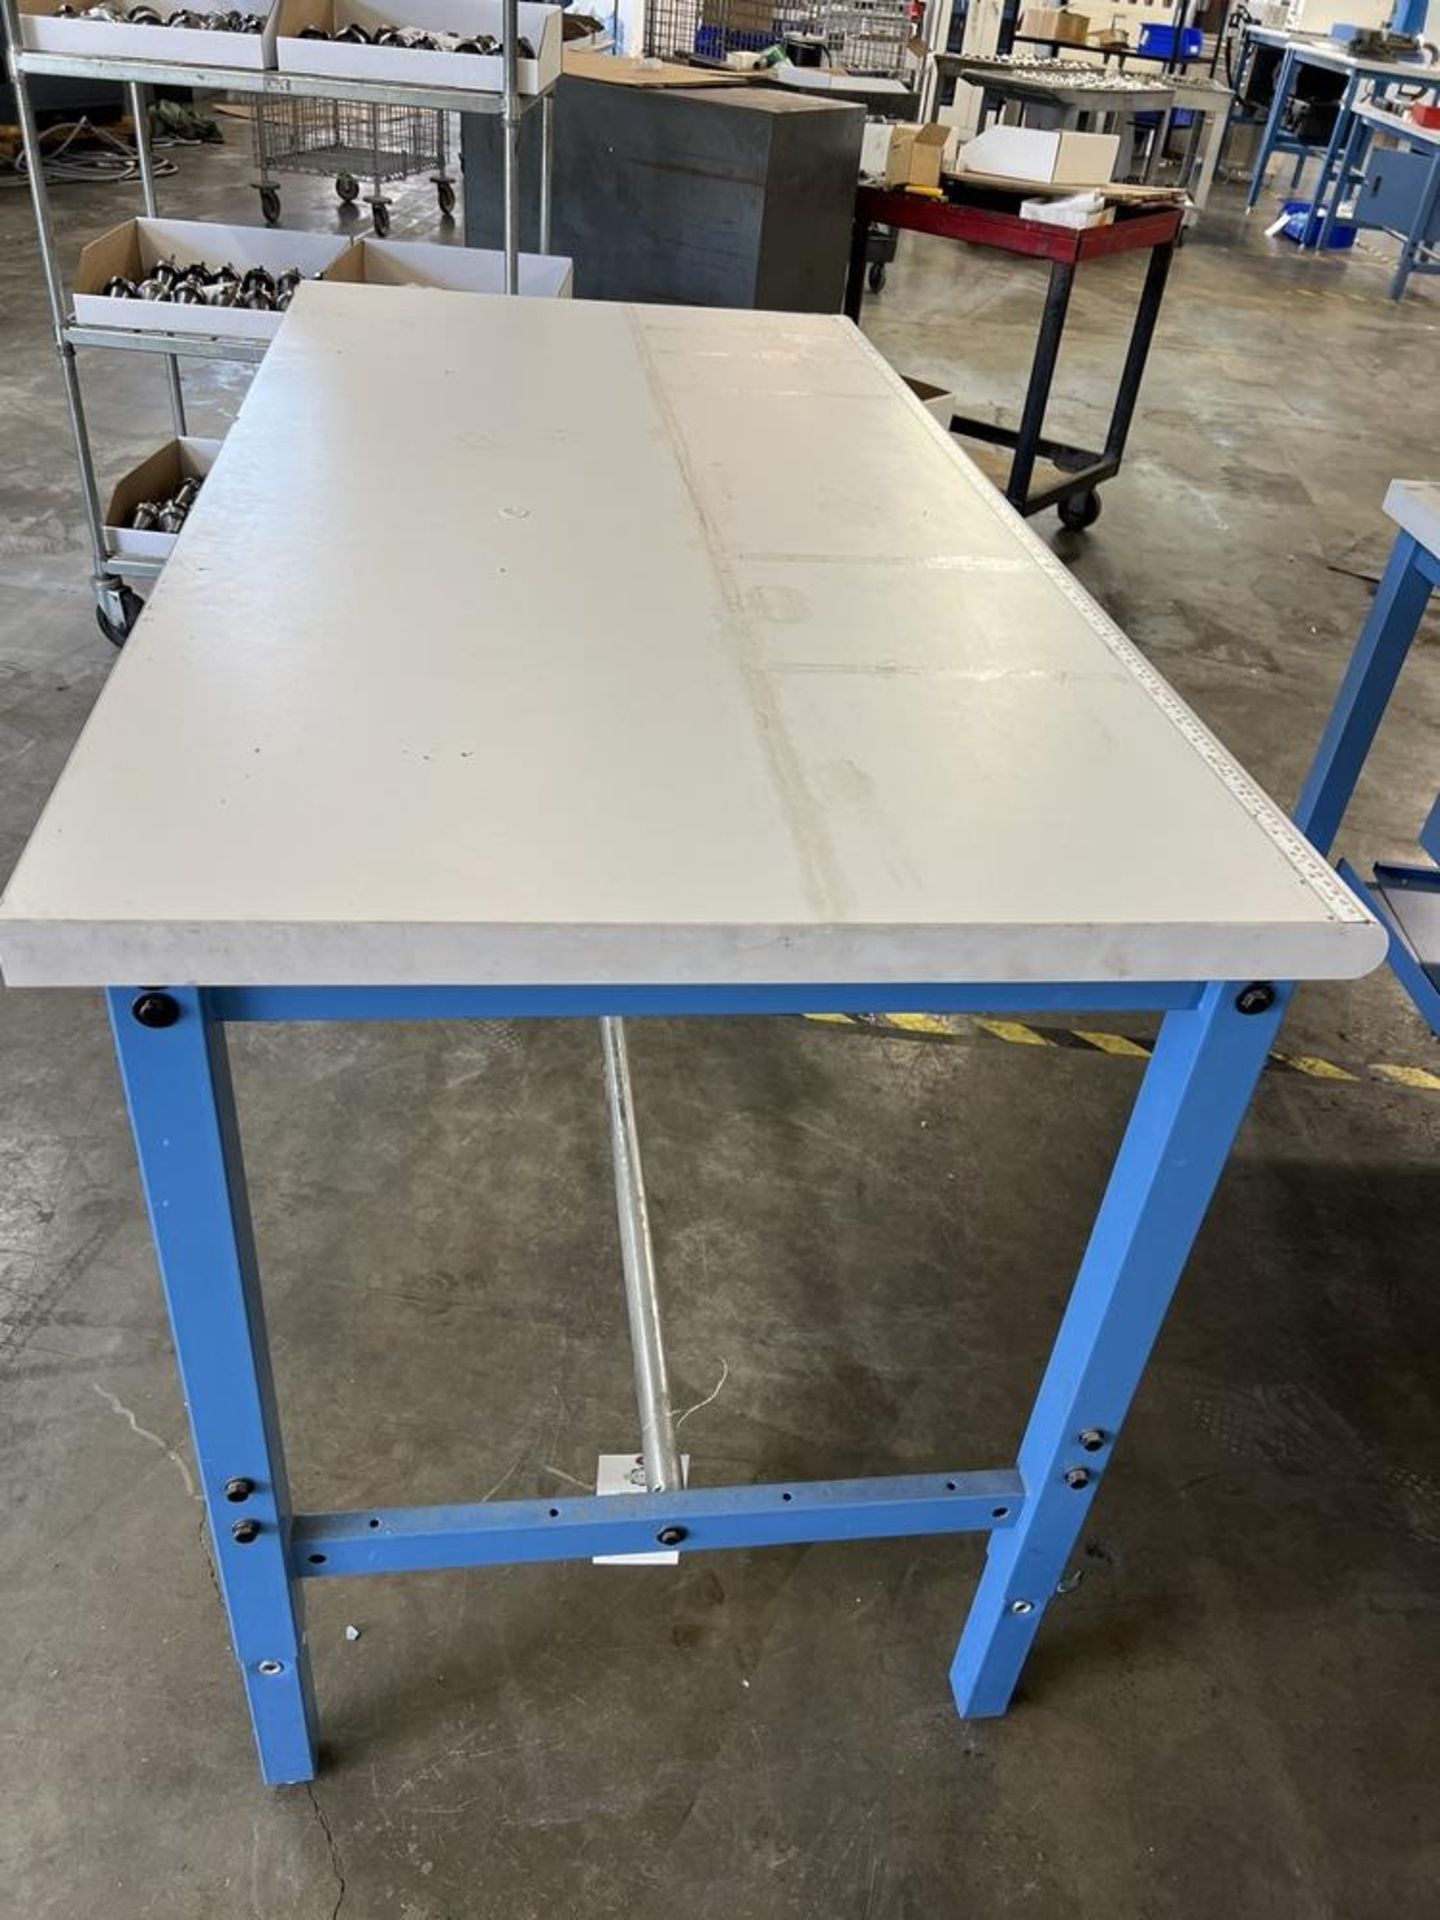 Global Industrial Adjustable Shop Table 60" x 30" x 38" With Built In Power Strip - Image 2 of 4